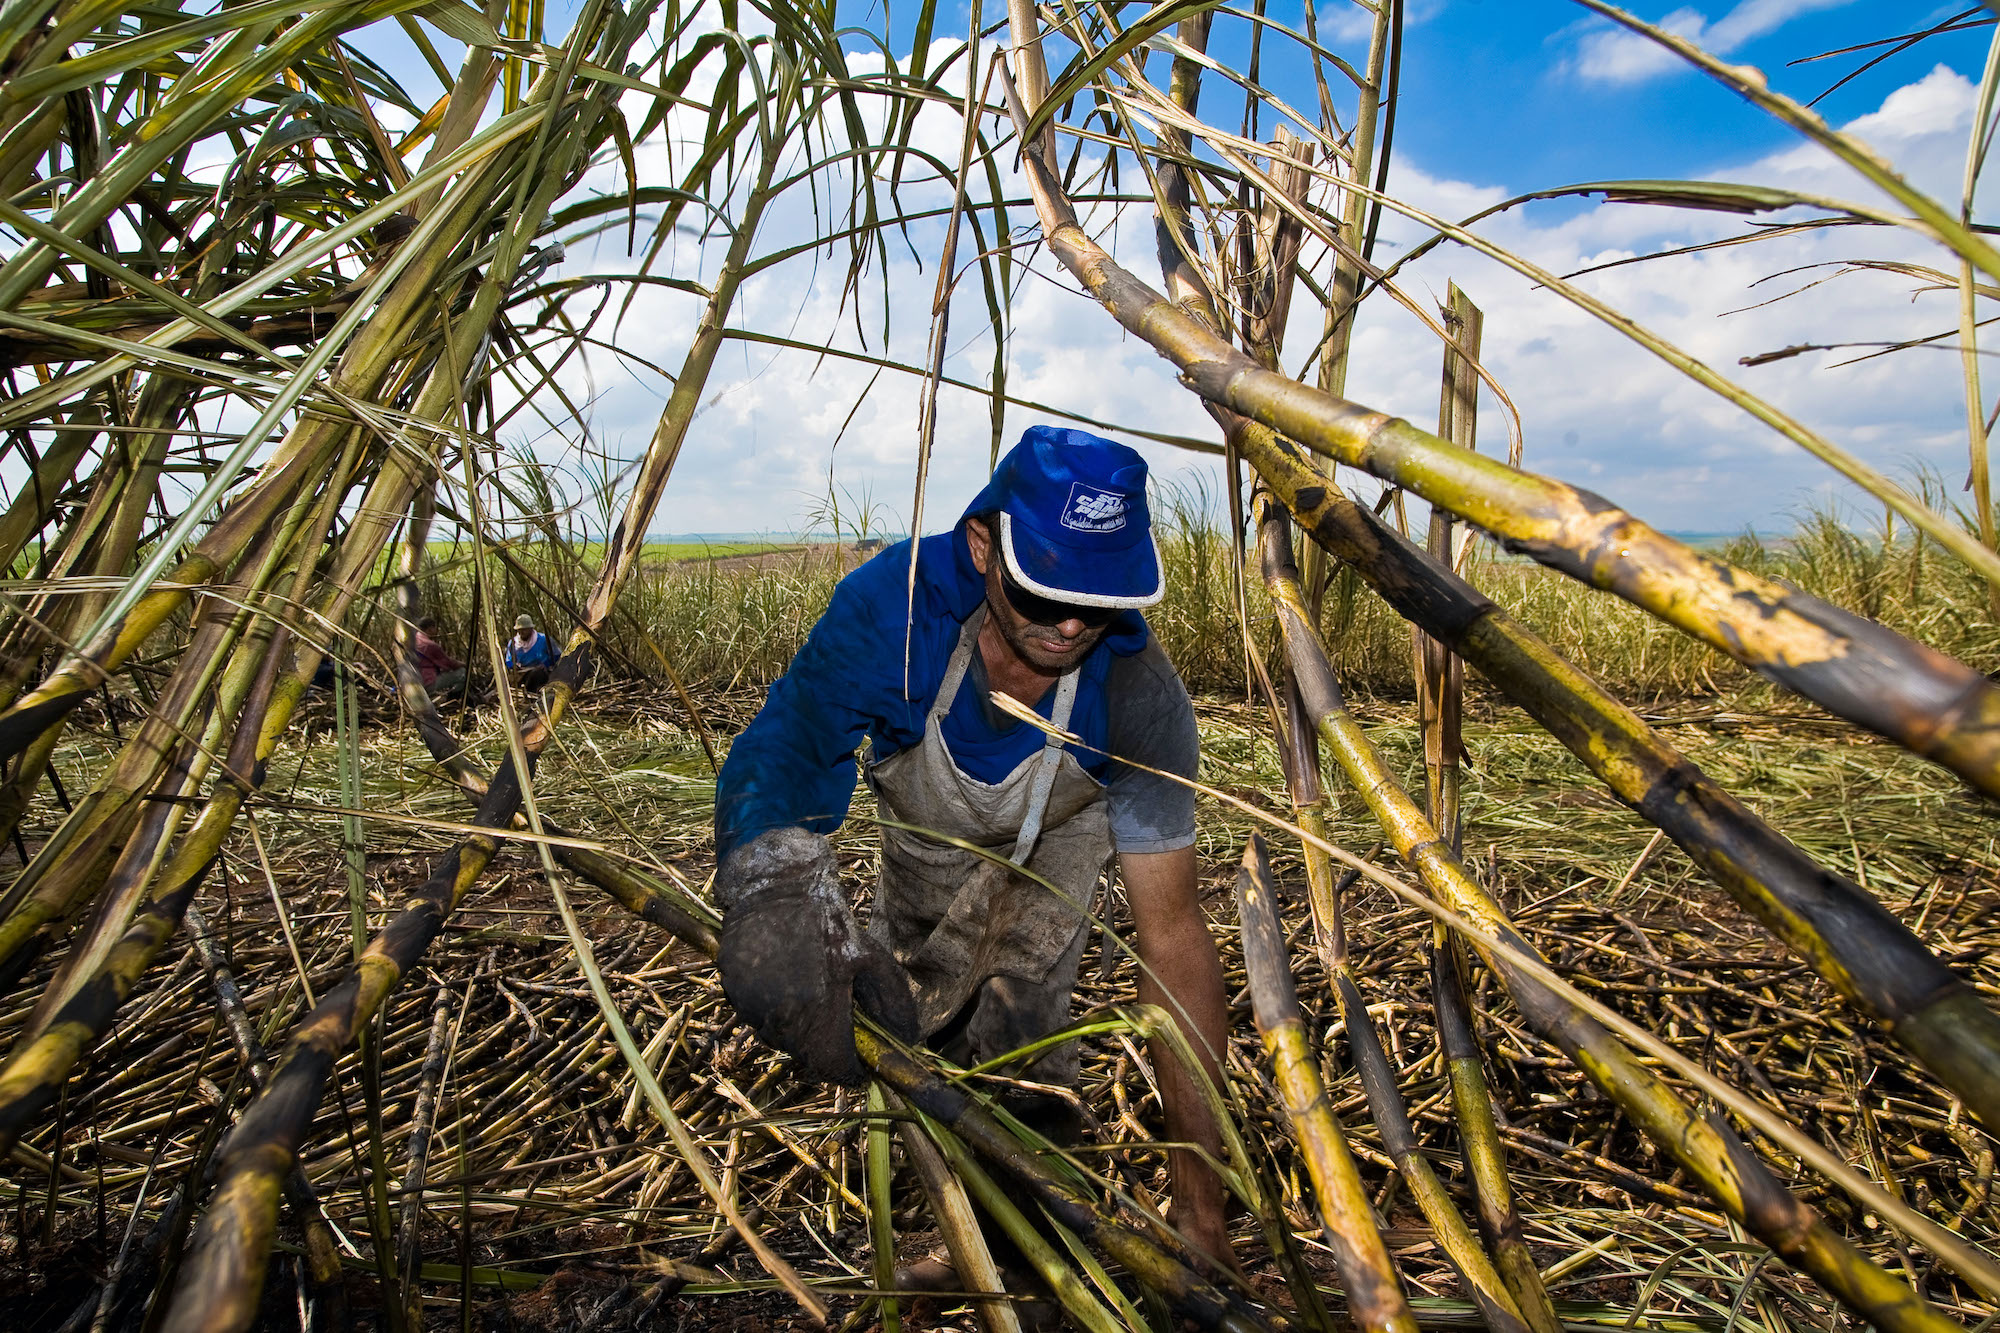 <p>Workers harvest sugarcane for ethanol biofuel in Sao Paulo State, Brazil (Image: Alamy)</p>